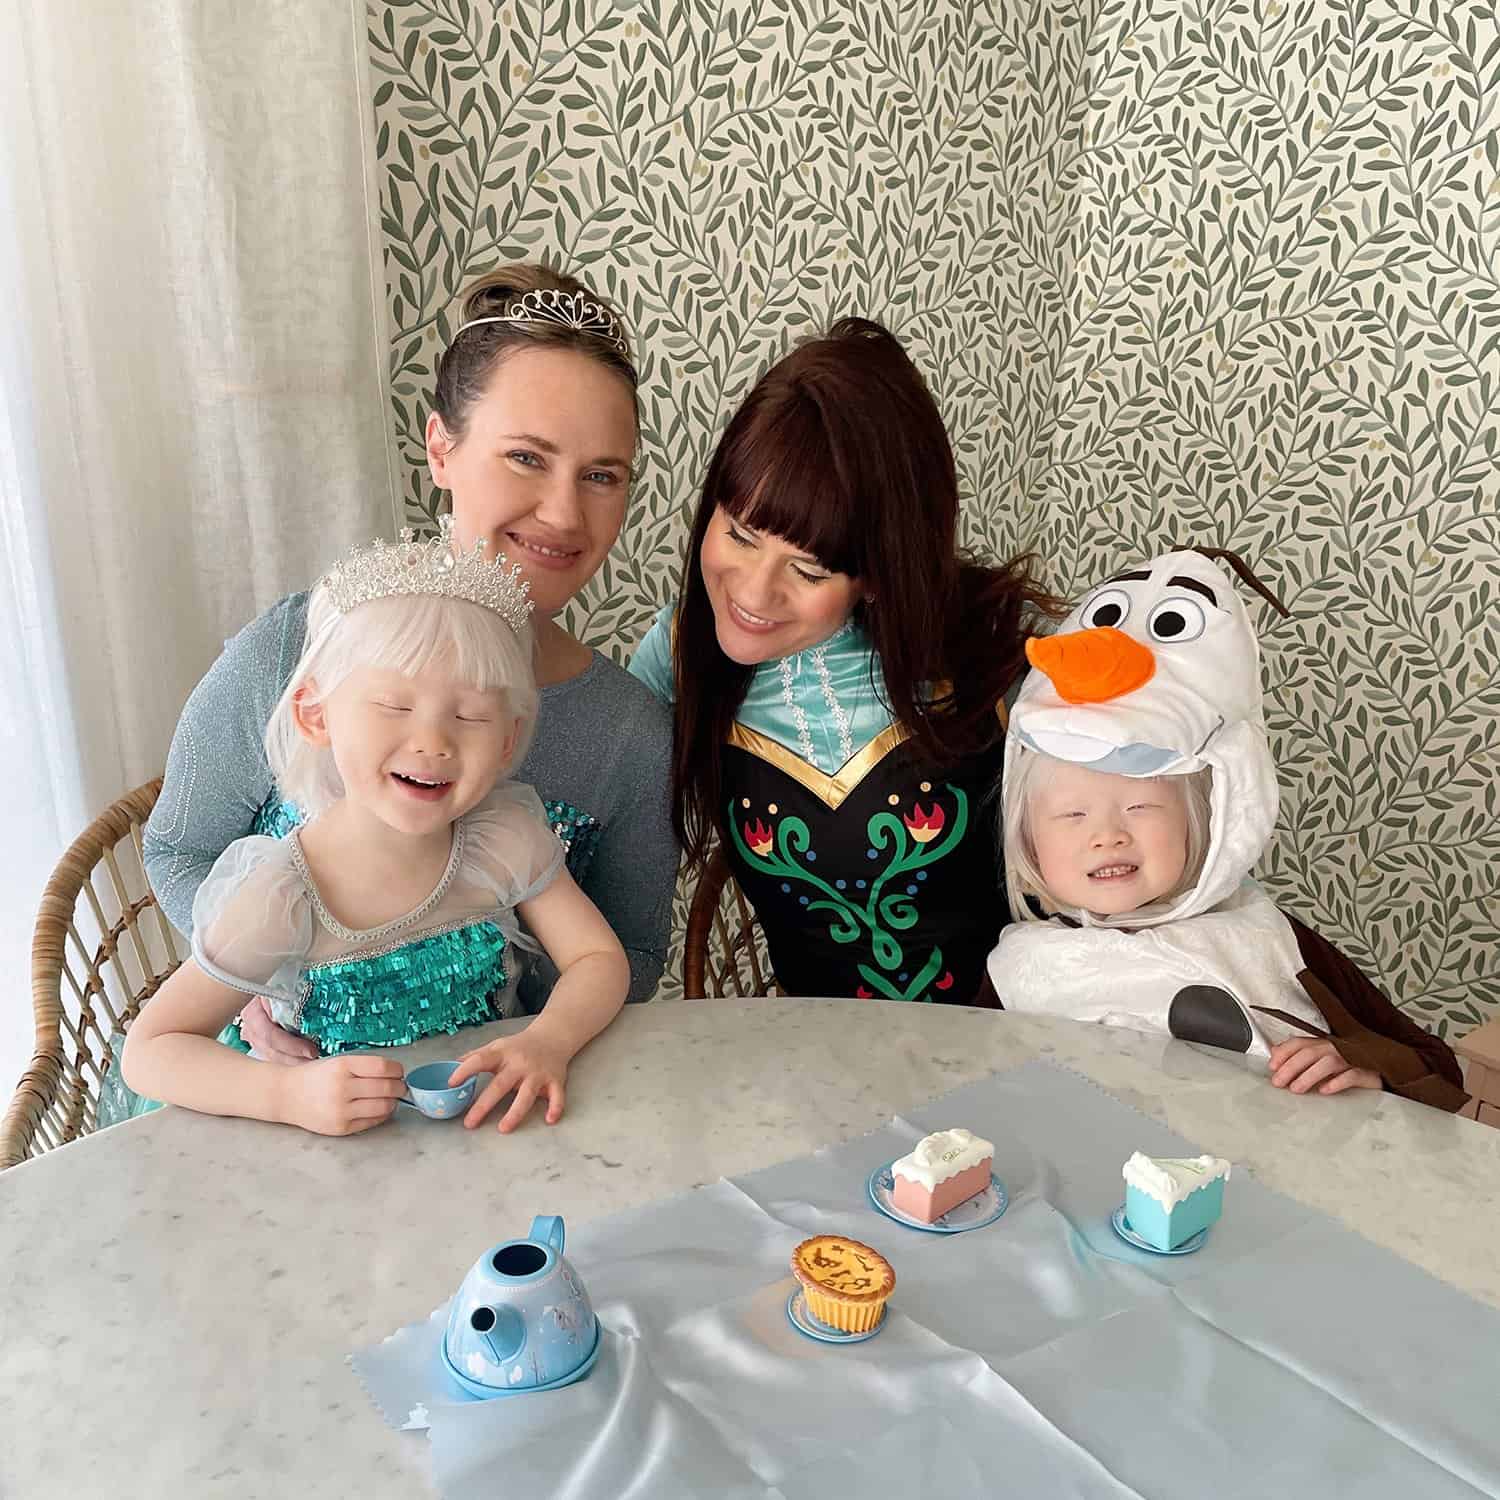 Frozen-themed birthday party costumes